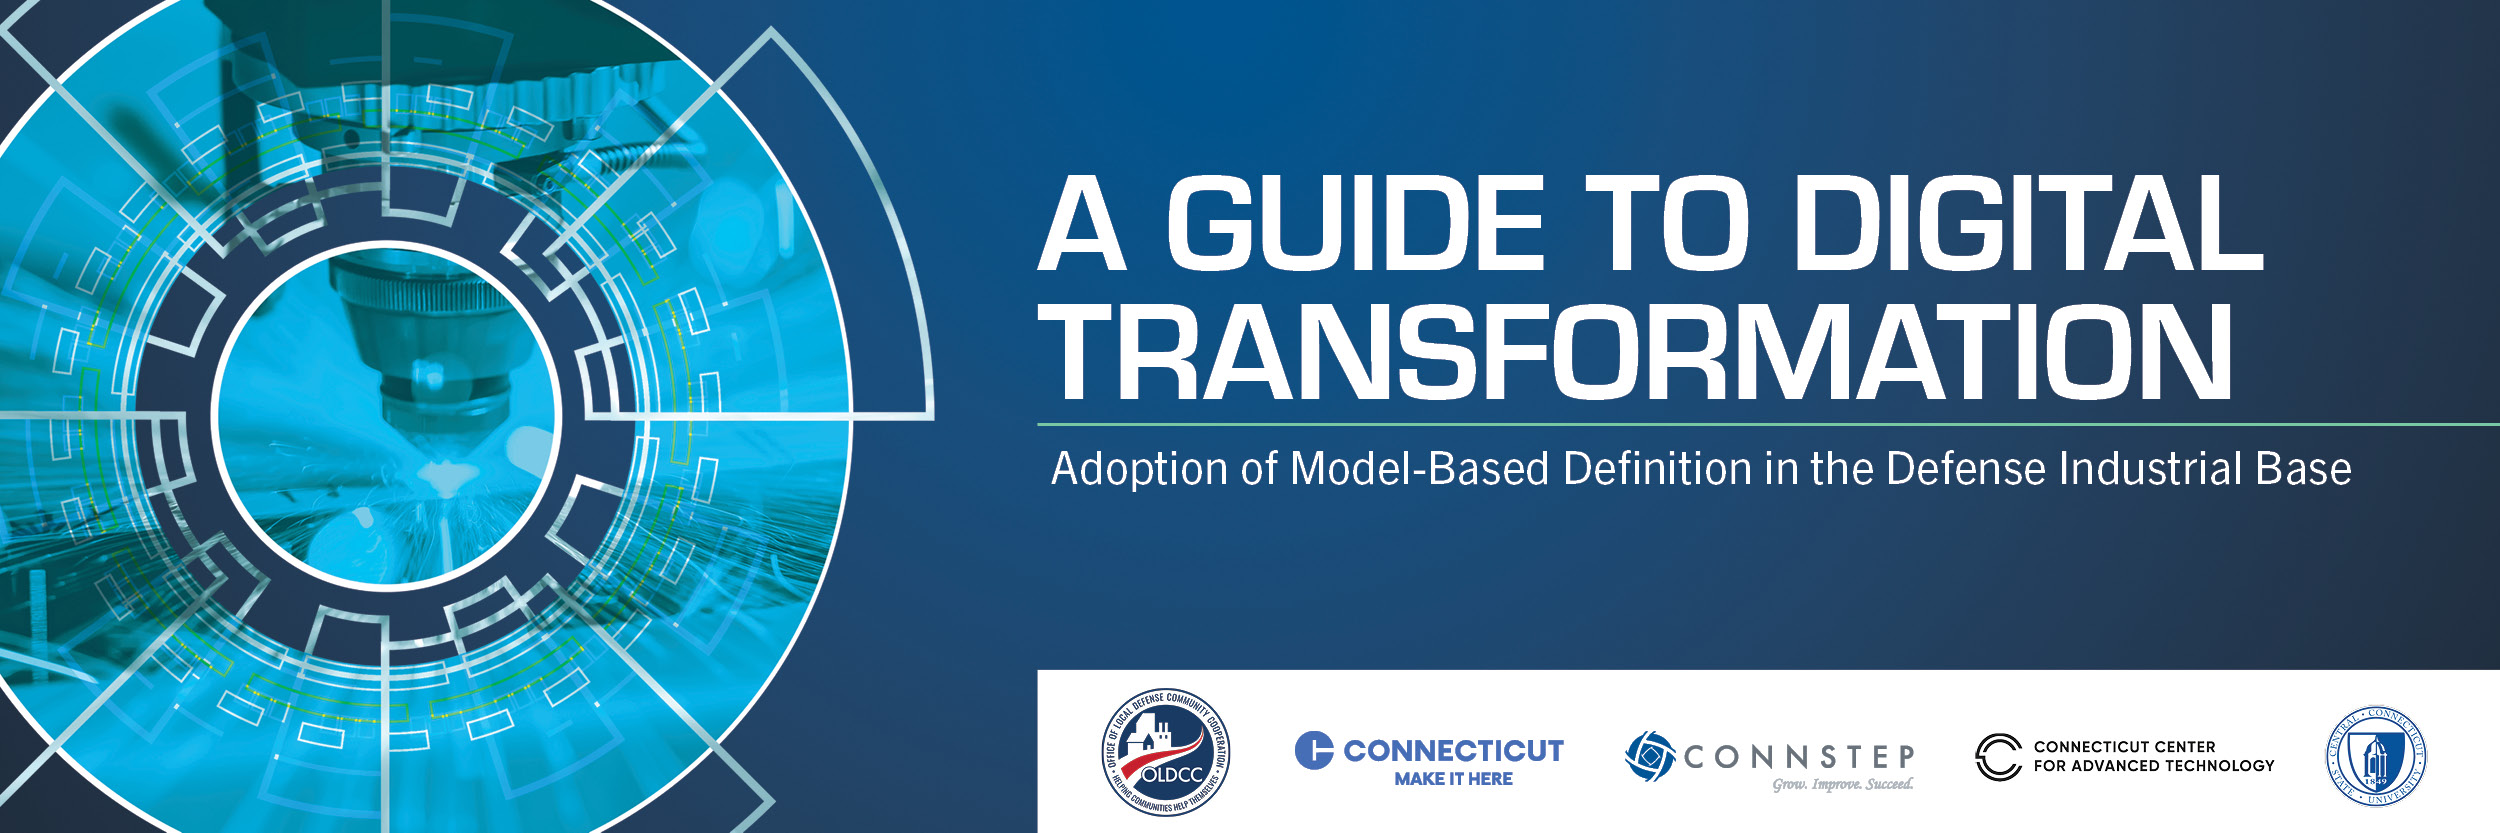 A Guide to Digital Transformation Hosted by CT State Community College Manchester